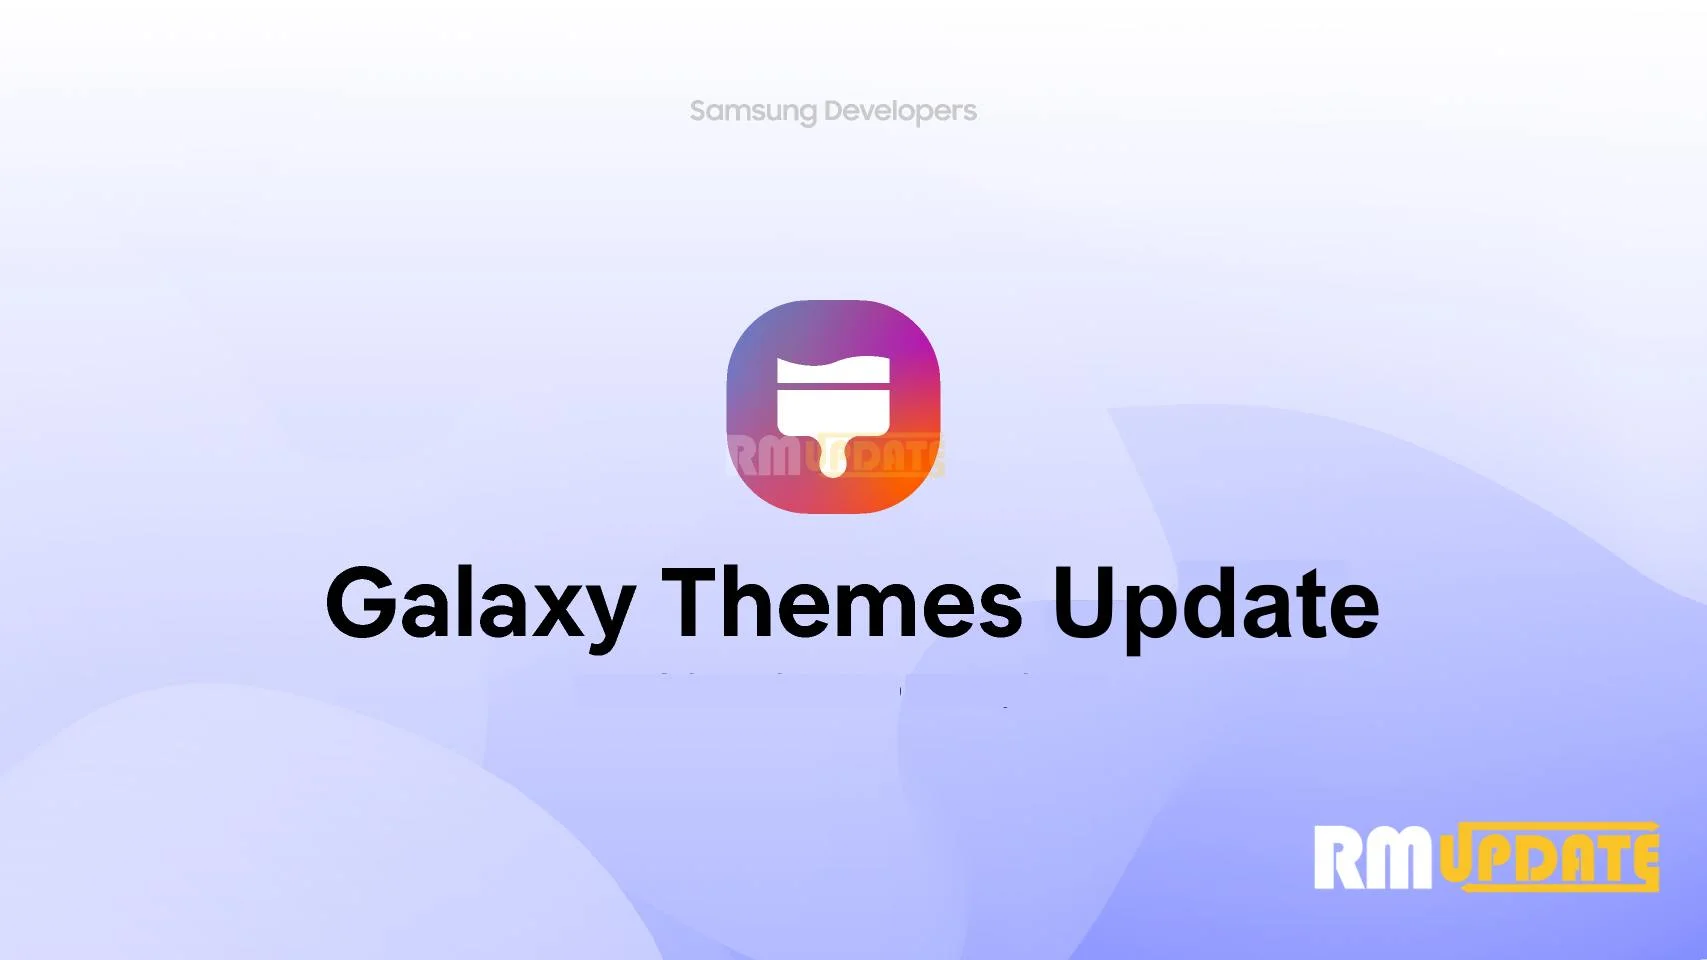 Samsung Themes getting a new version v5.2.05.7  update- What’s New?